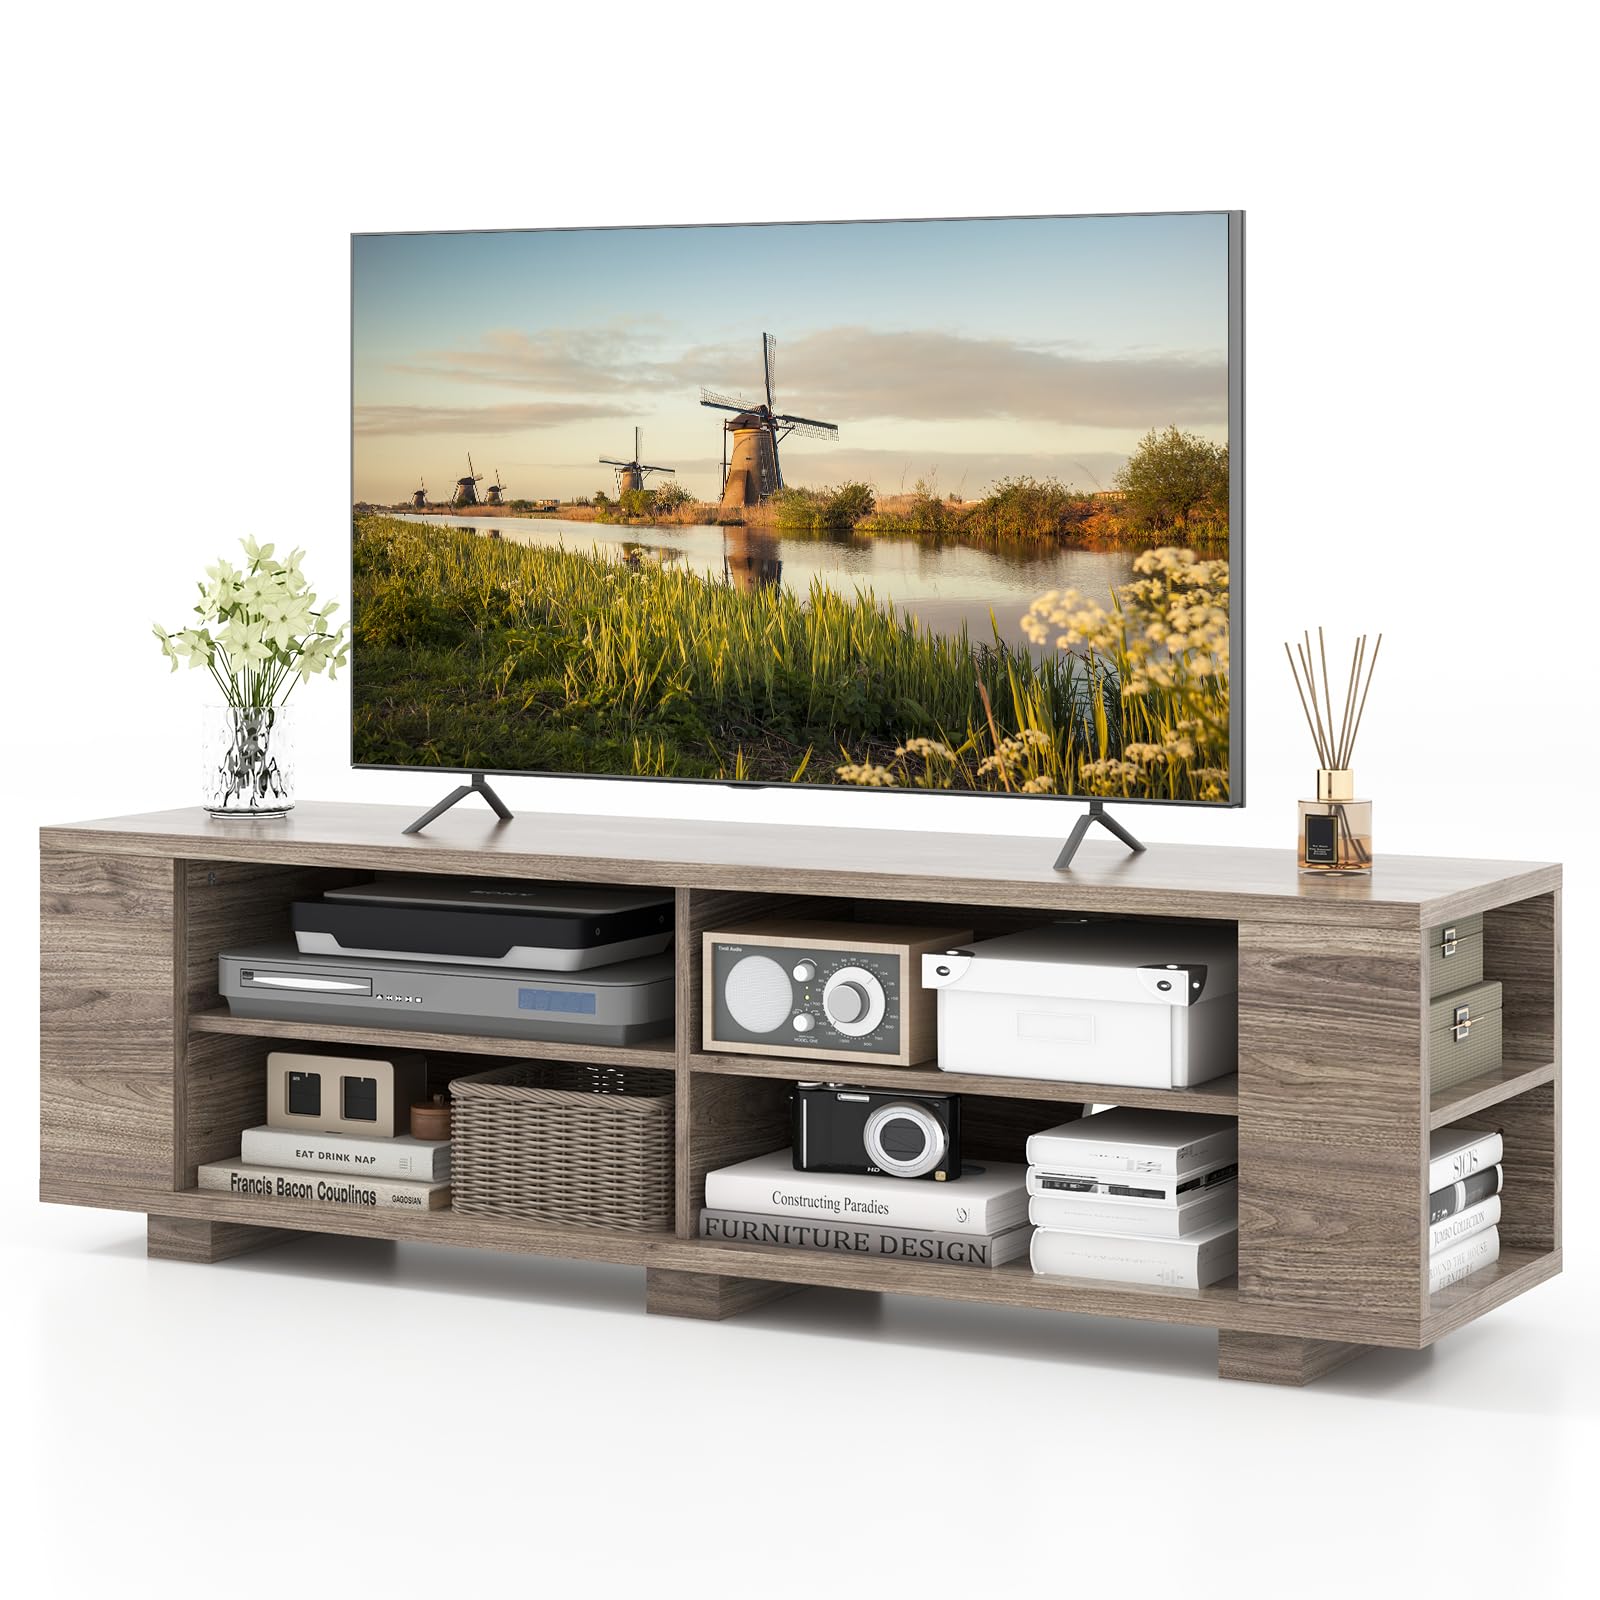 Giantex TV Stand Entertainment Center - Farmhouse Television Table up to 65 Inches TVs, 7 Colors